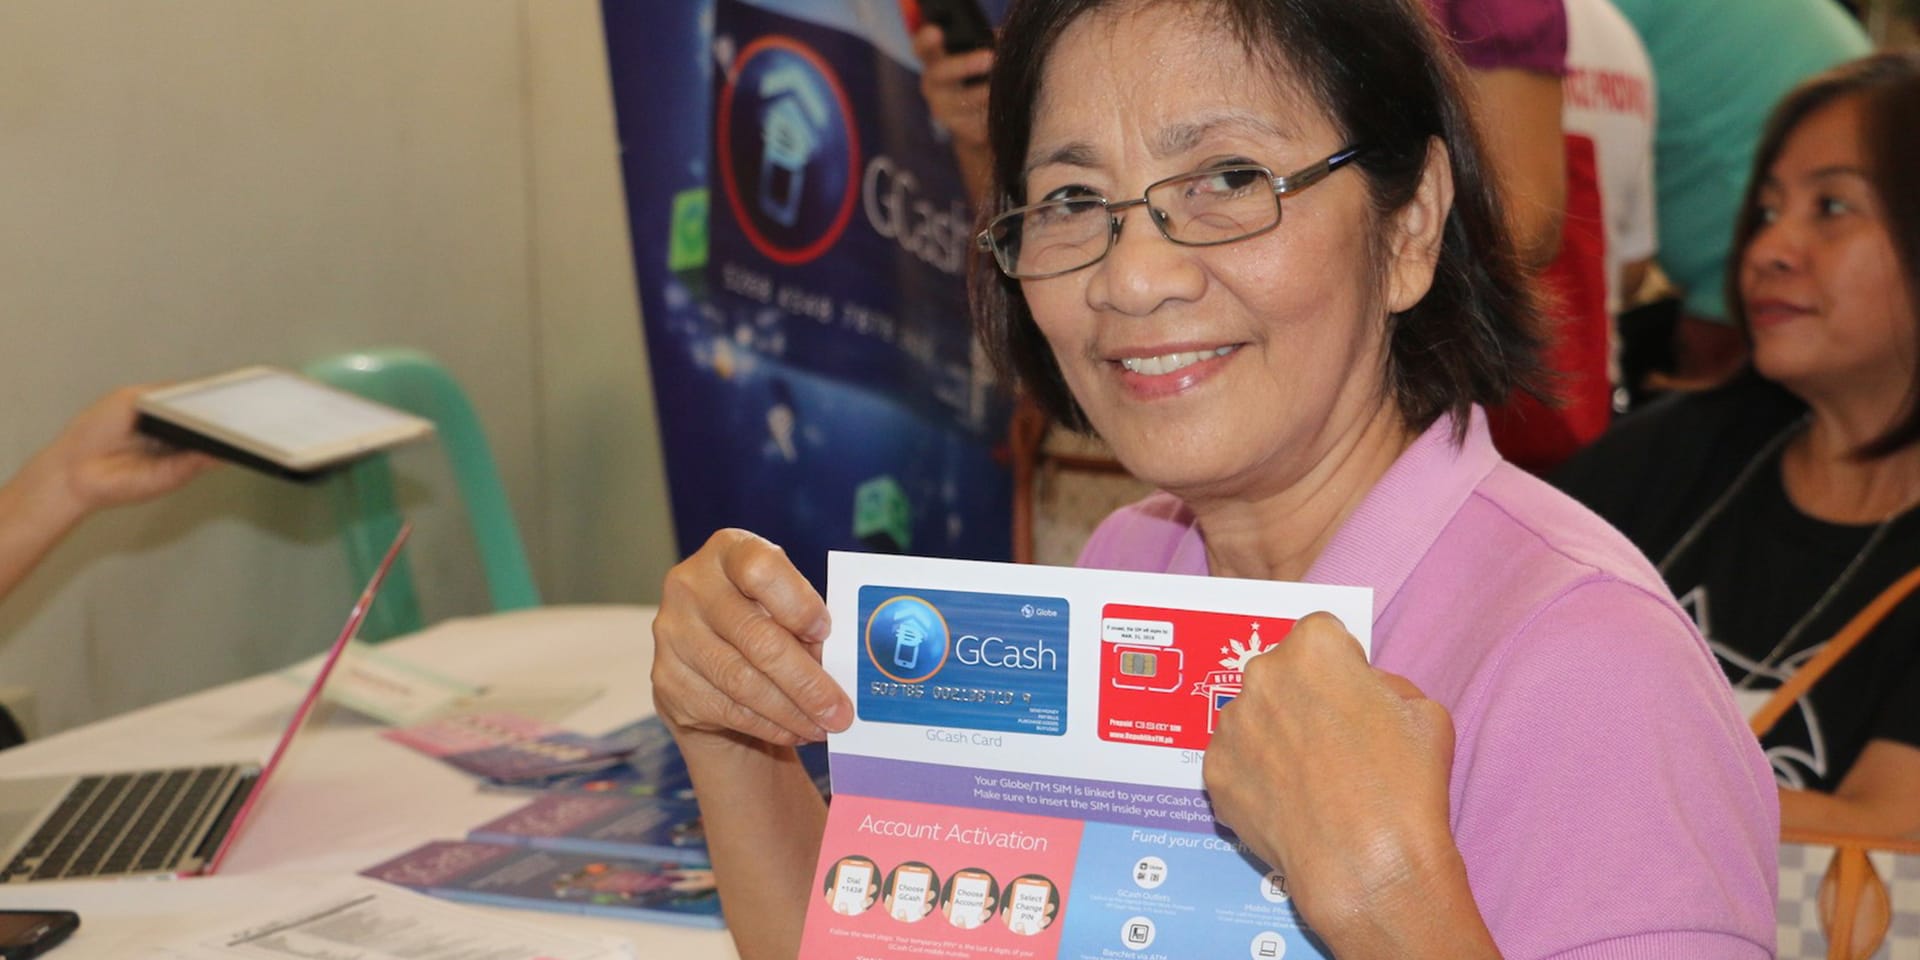 A woman smiling and holding up a letter containing an electronic payment card.